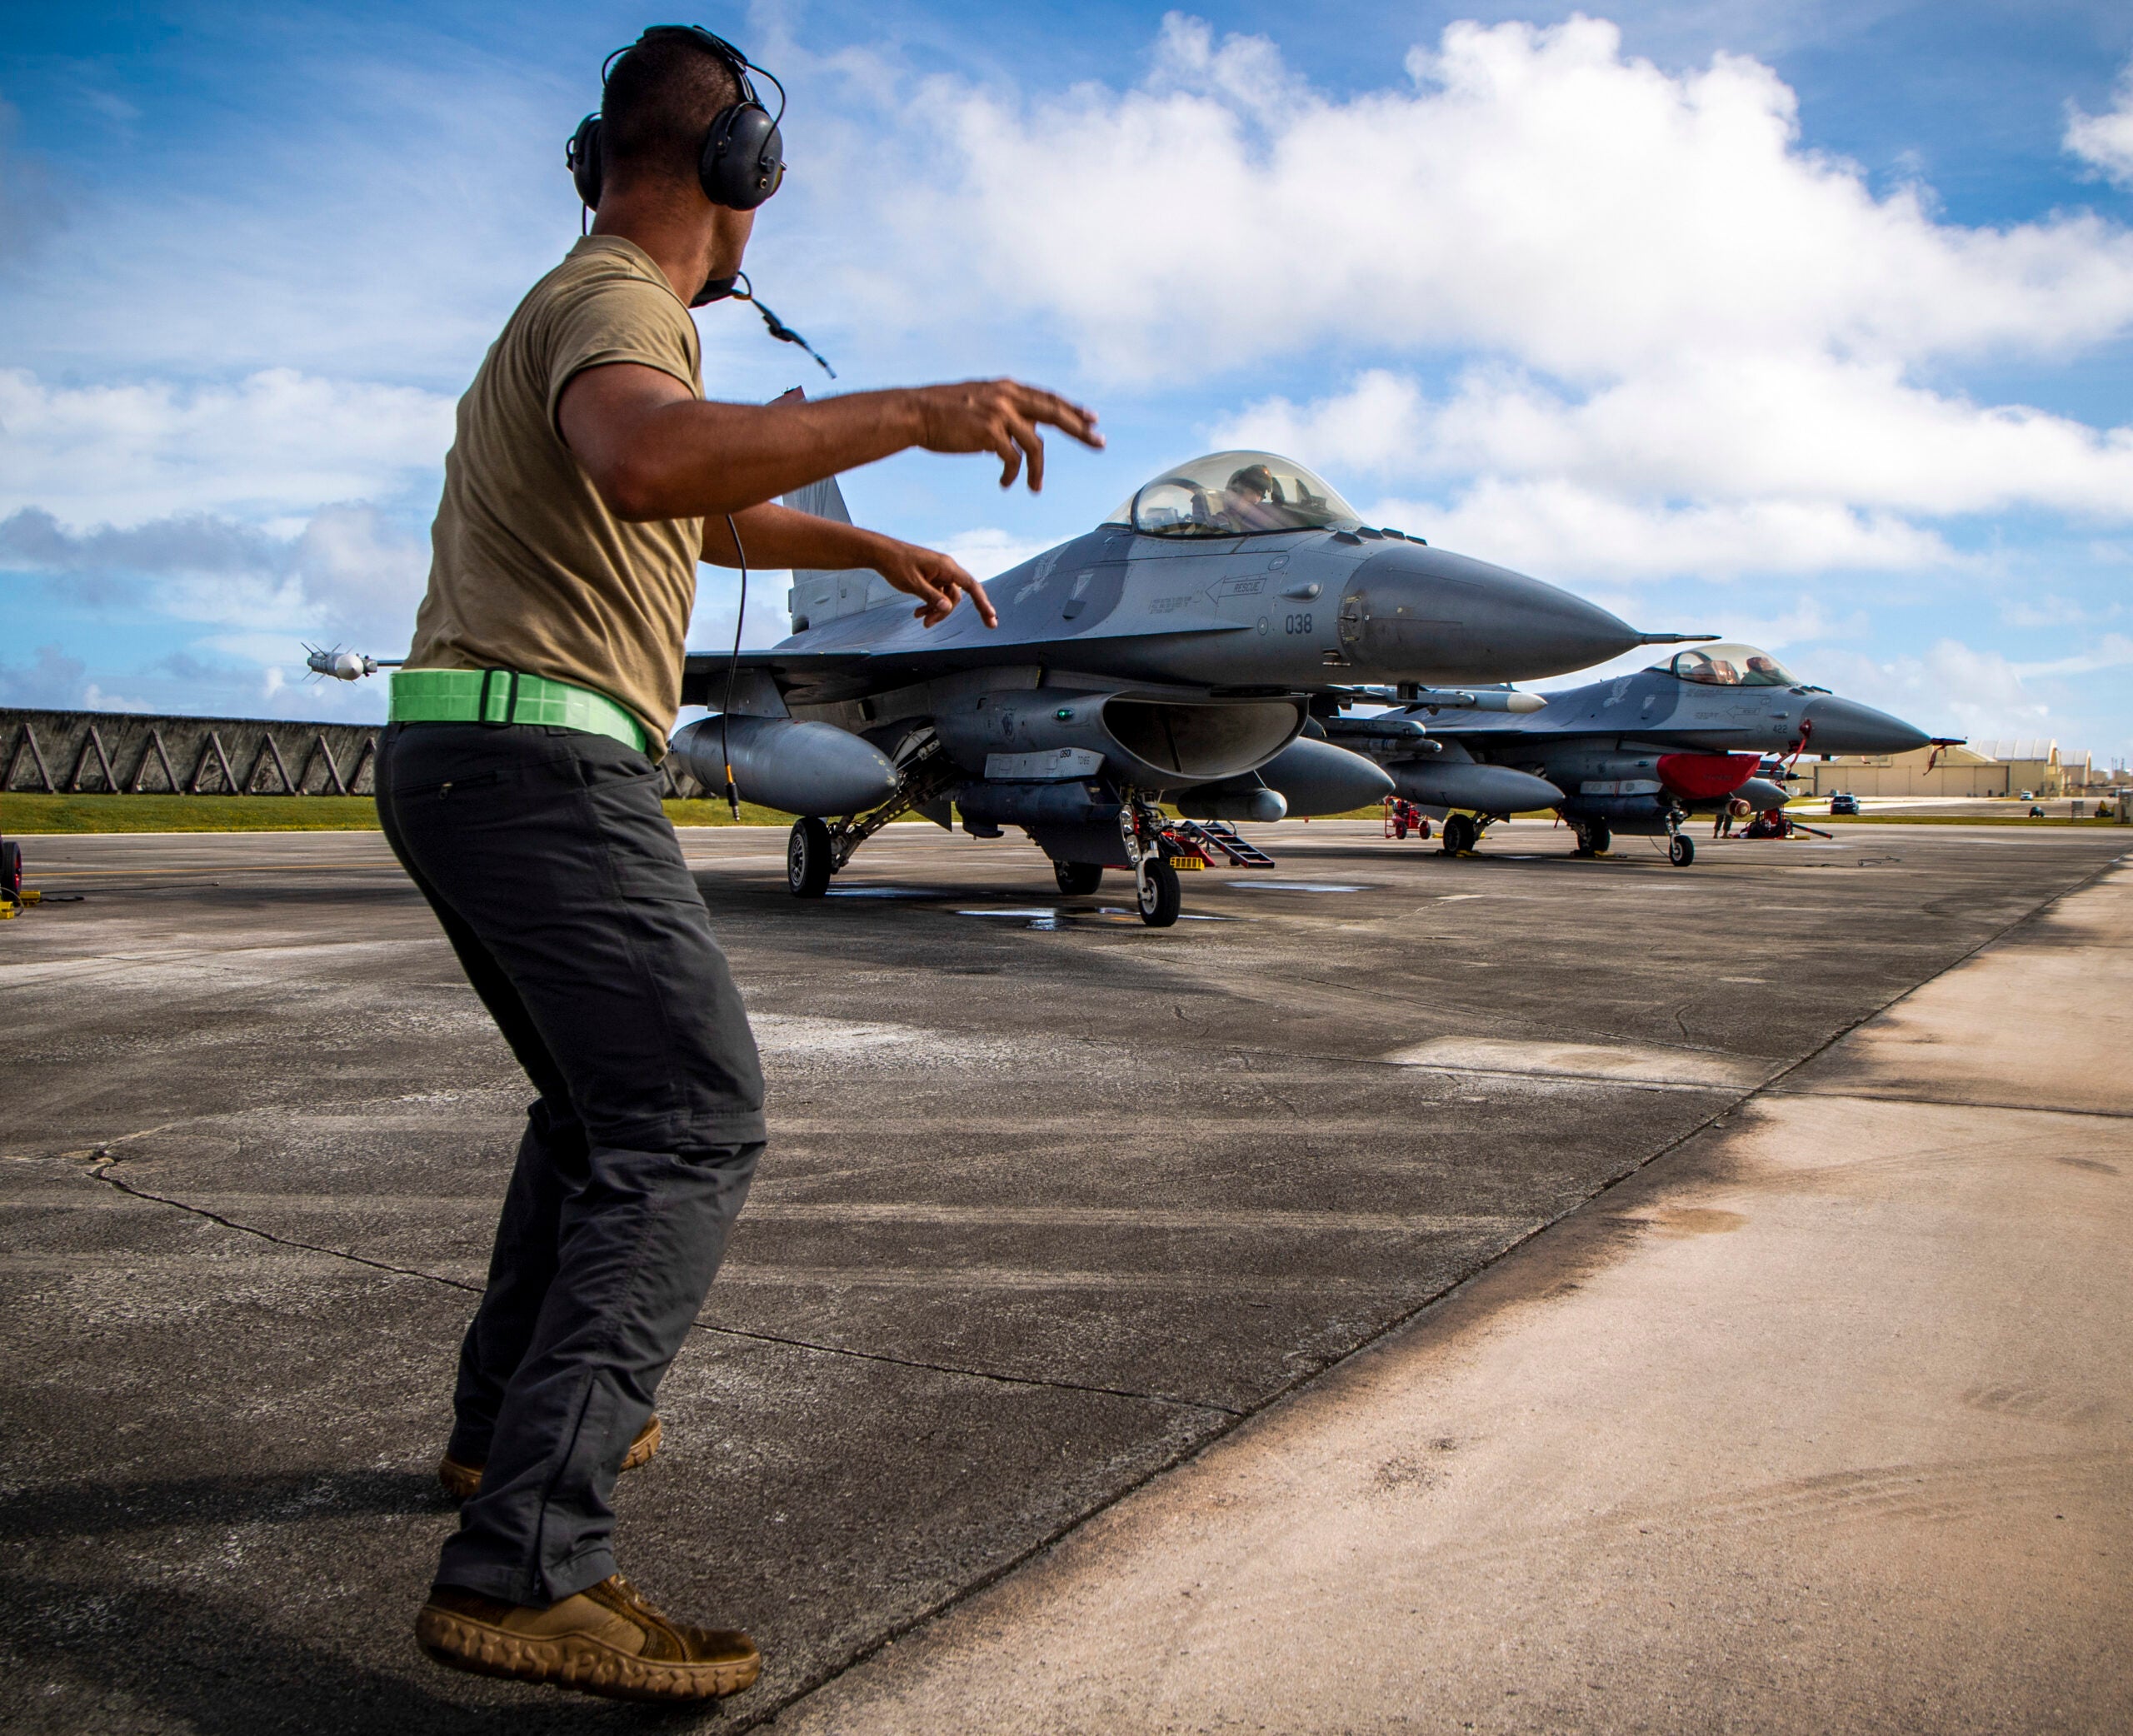 A U.S. Air Force crew chief assigned to the 13th Aircraft Maintenance Squadron motions a U.S. Air Force F-16 Fighting Falcon assigned to the 13th Fighter Squadron to taxi during exercise Cope North 21 at Andersen Air Force Base, Guam, Feb. 17, 2021.   Exercises such as Cope North allow the Pacific Air Forces to validate new ways to deploy and maneuver assets through exercises and engagements. (U.S. Air Force photo by Senior Airman Duncan C. Bevan)